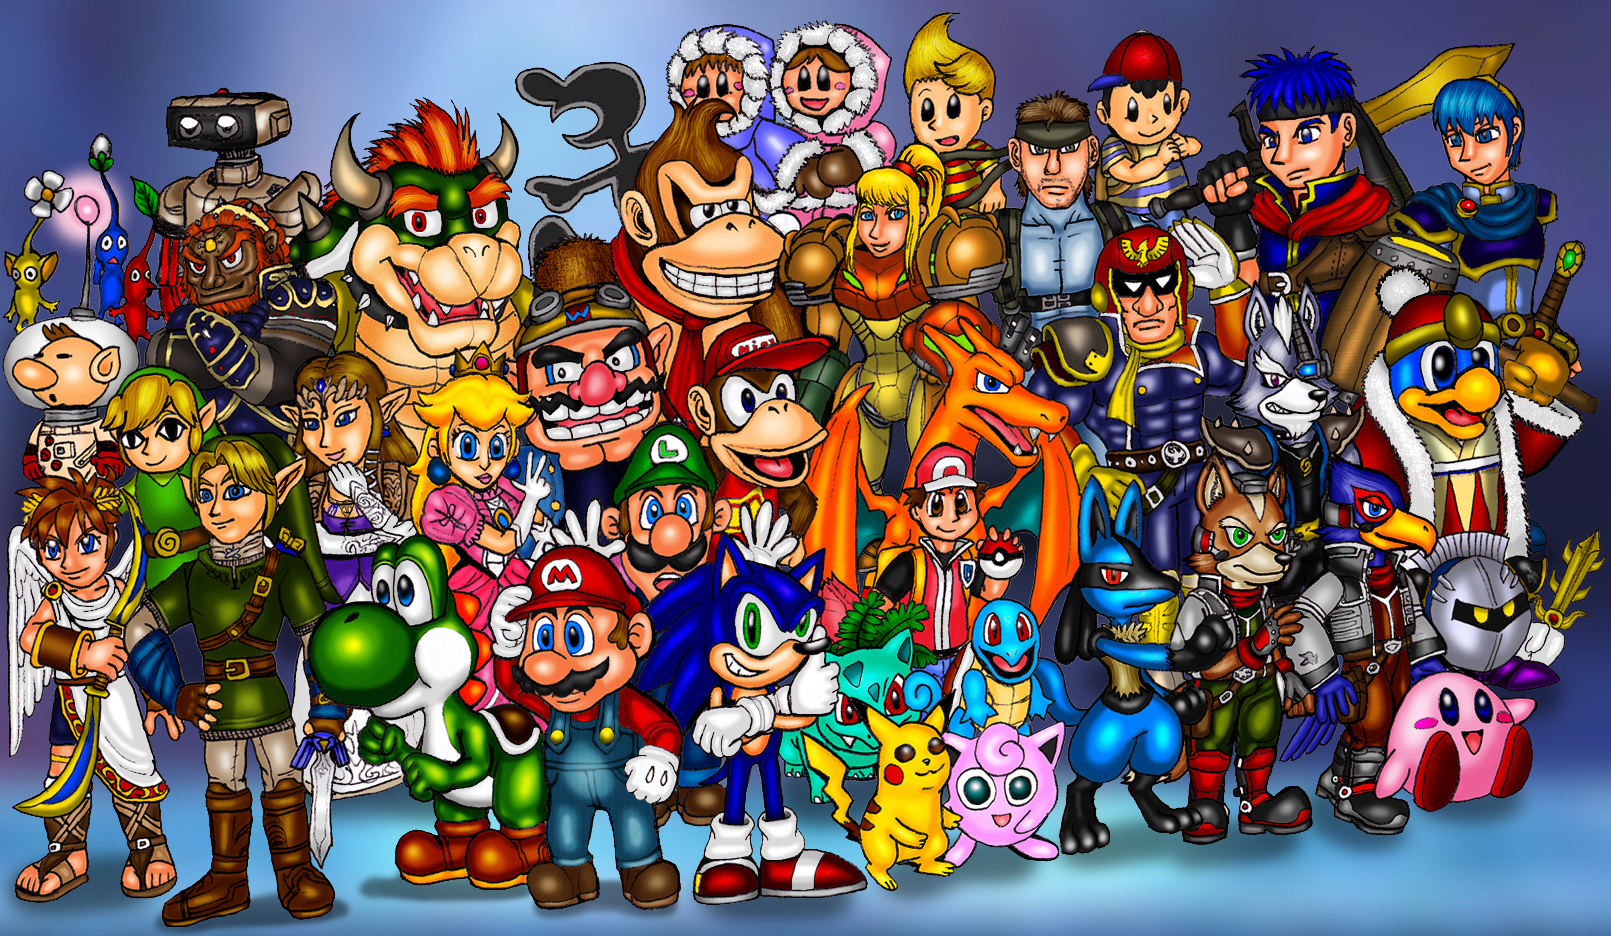 super smash flash 2 with all characters